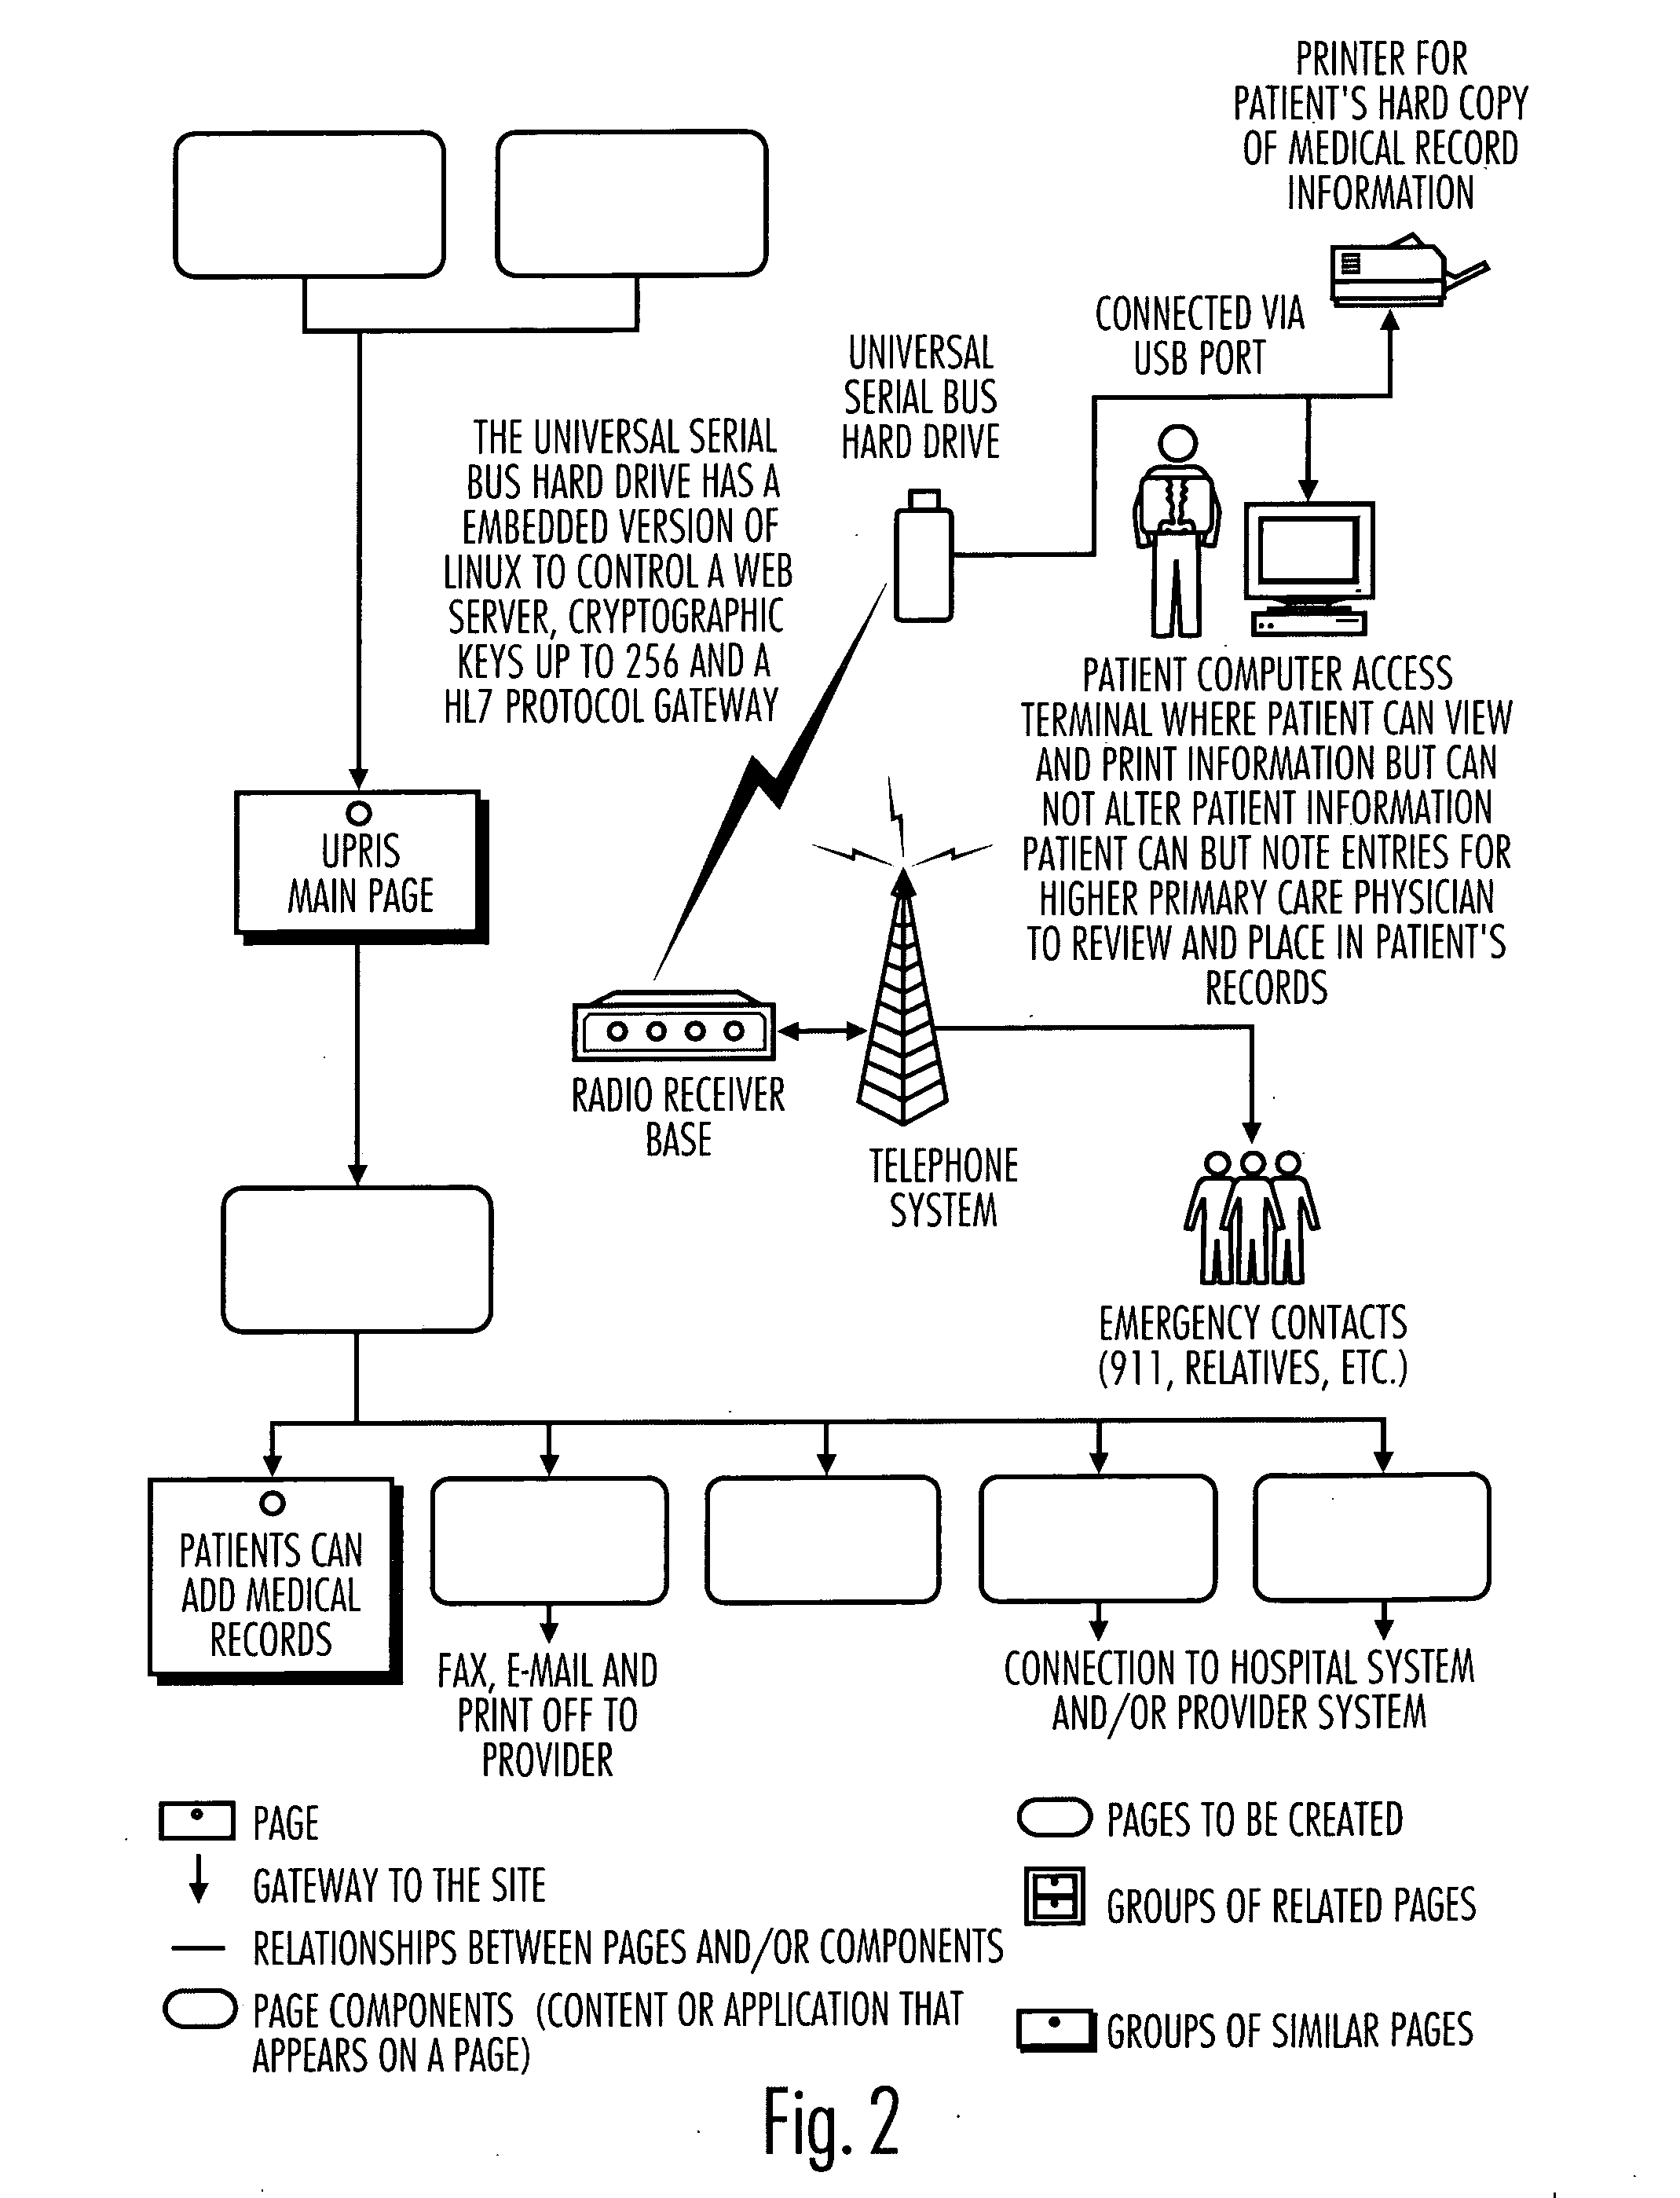 Method, software and device for managing patient medical records in a universal format using USB flash drive and radio telephone auto dialer and siren